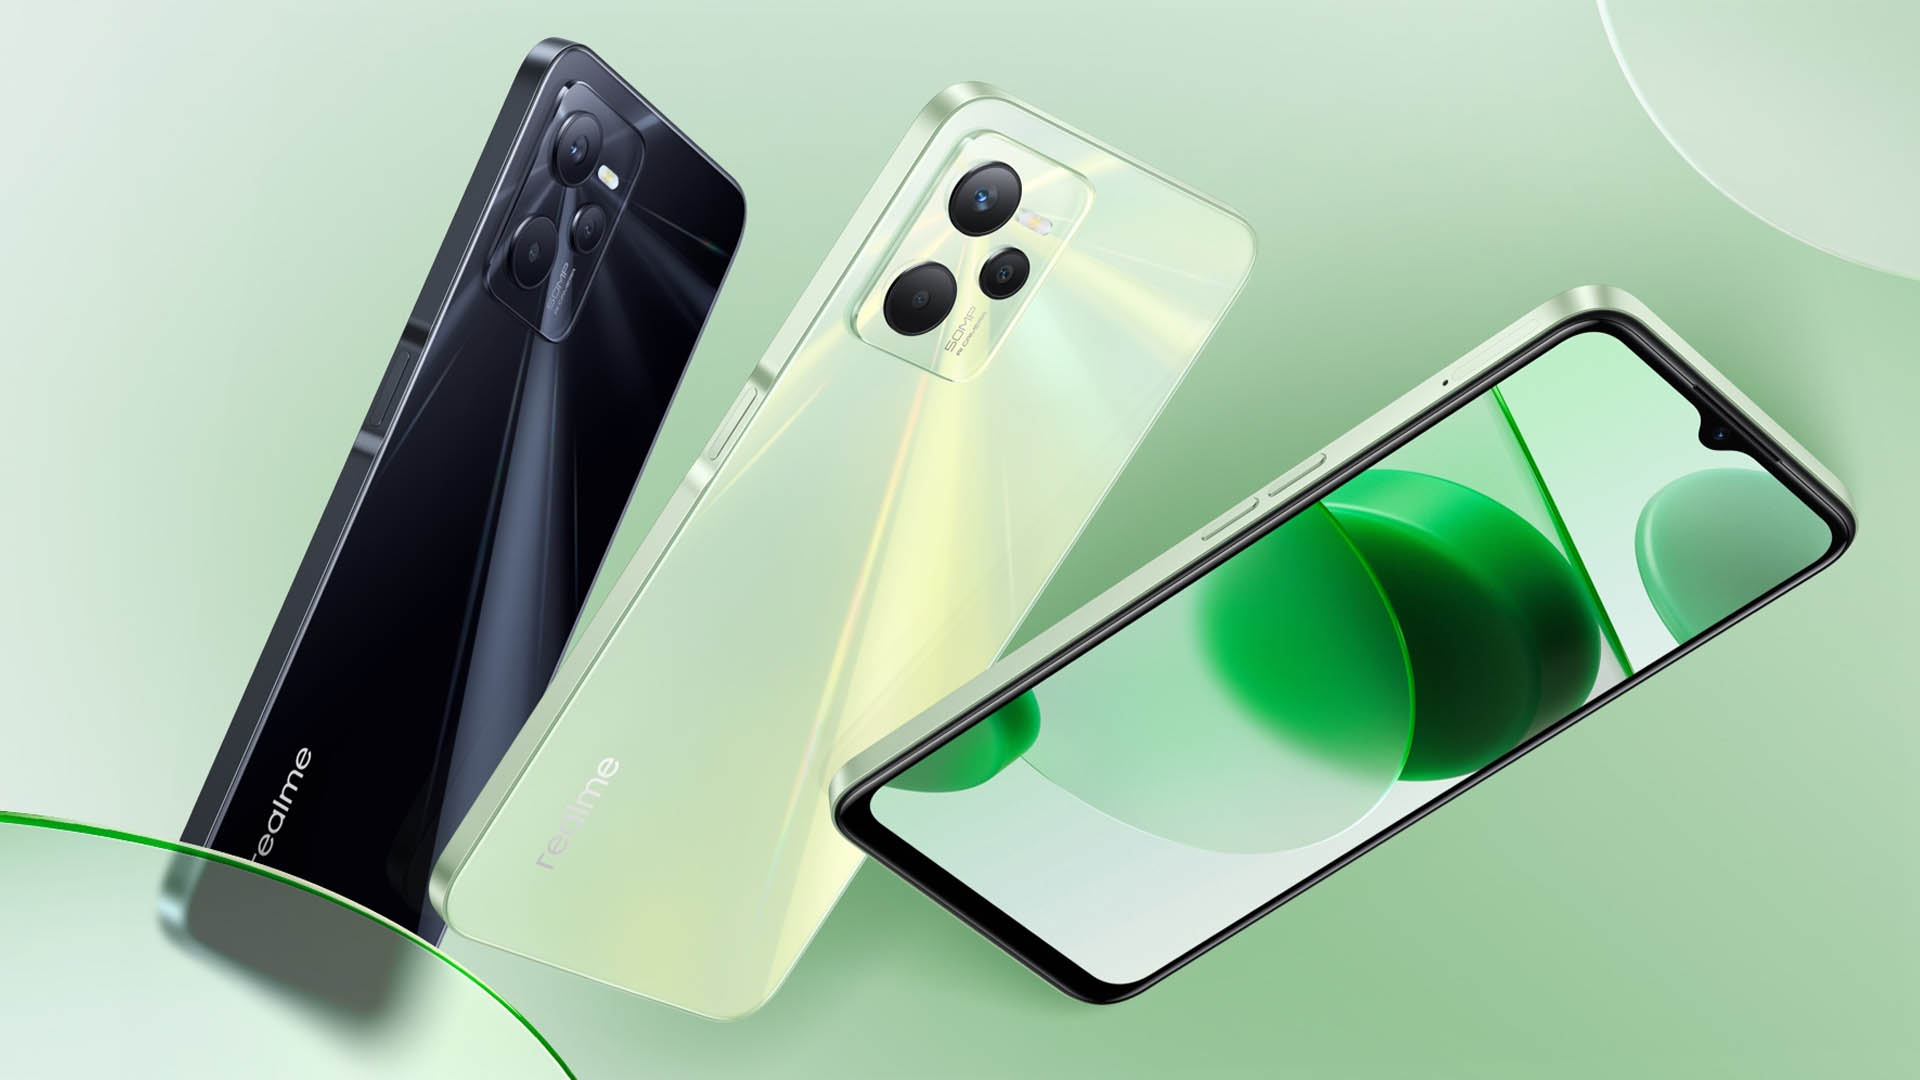  Three Realme C63 smartphones with 8GB RAM and 128GB storage in black, green, and blue colors.